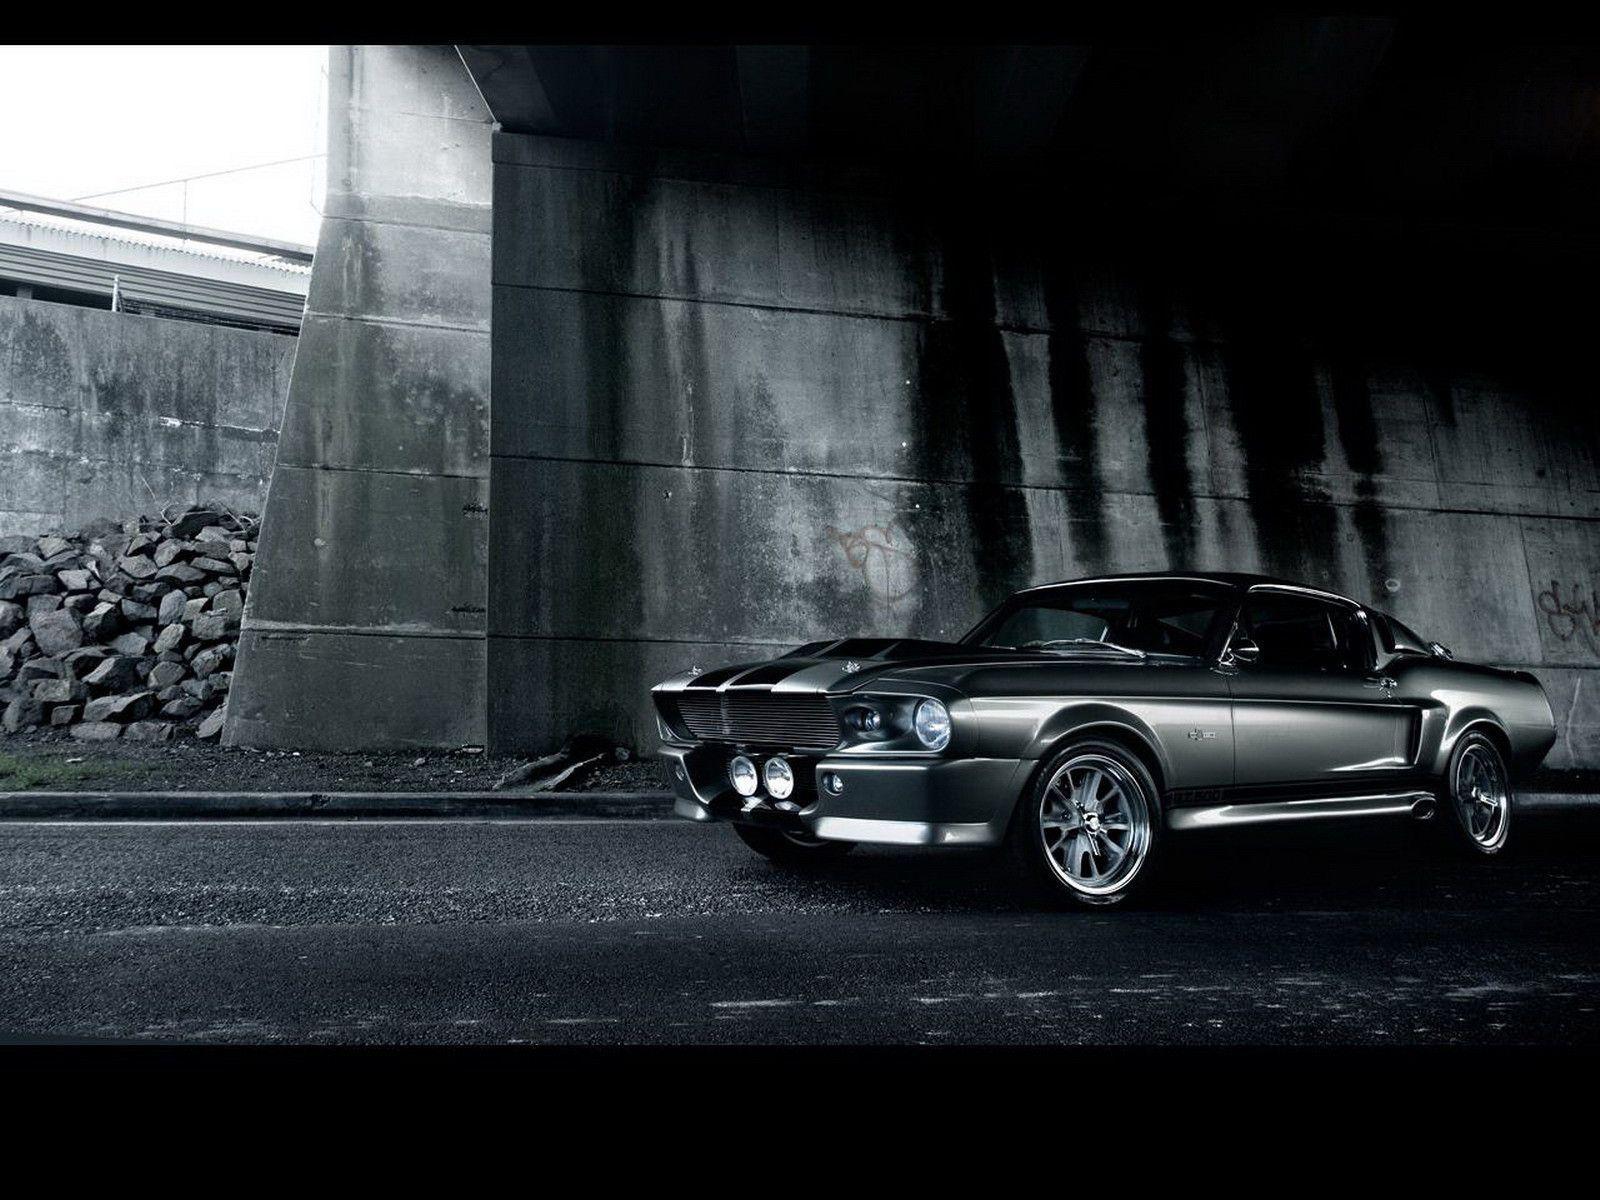 Ford Mustang 1967 Eleanor Wallpaper 1967 Shelby Mustang Gt500